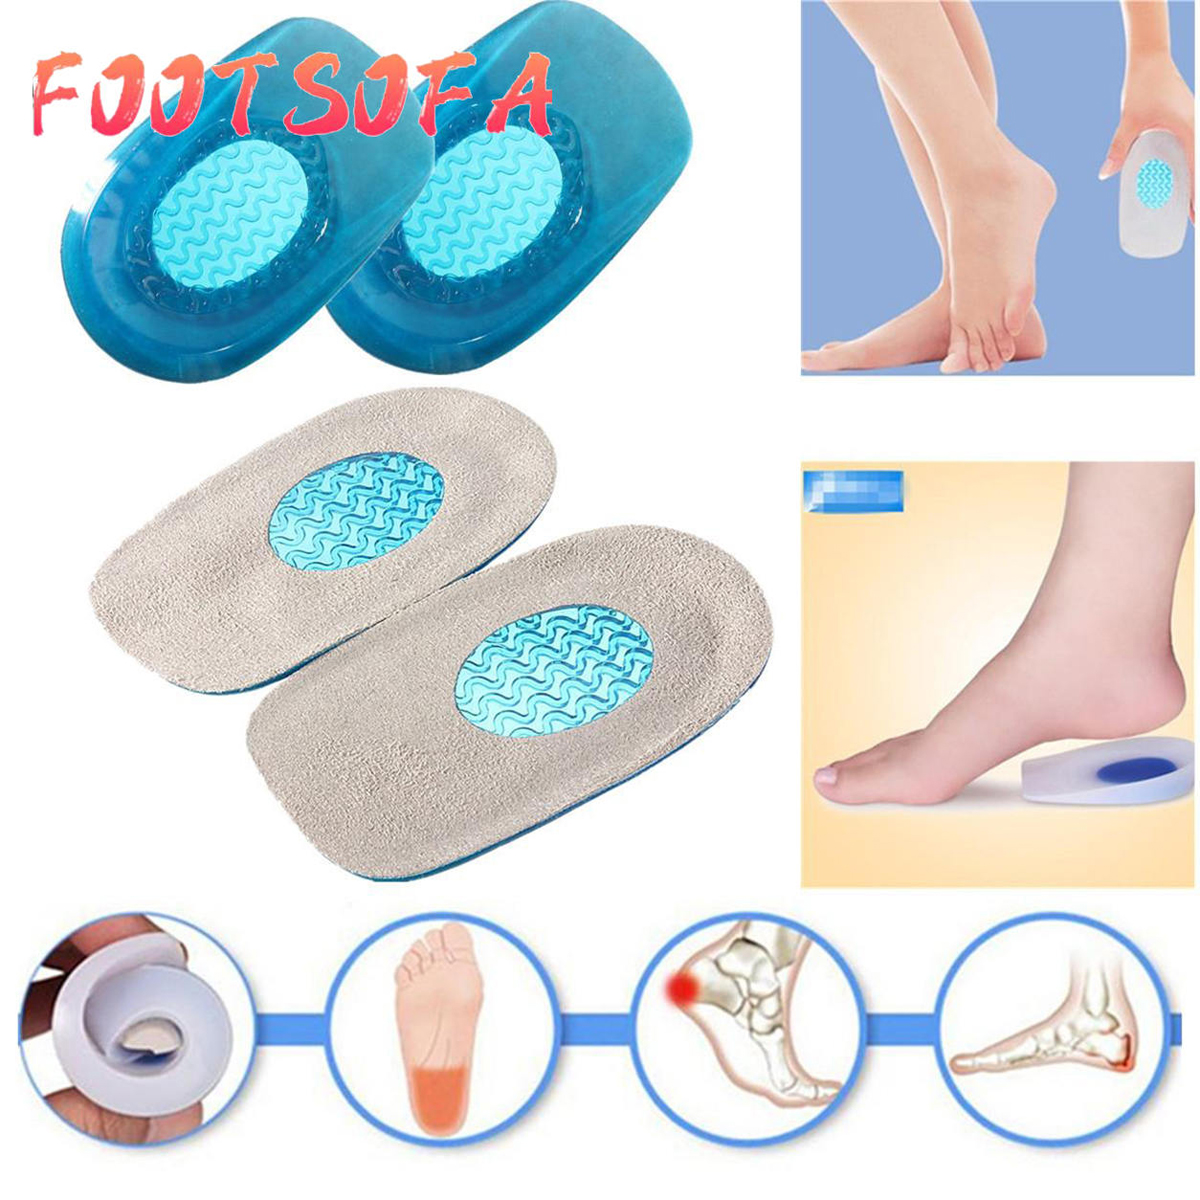 Trendmade Silicone Gel Heel Protector Insole Pads for Swelling, Pain  Relief, Foot Care Support Cushion for